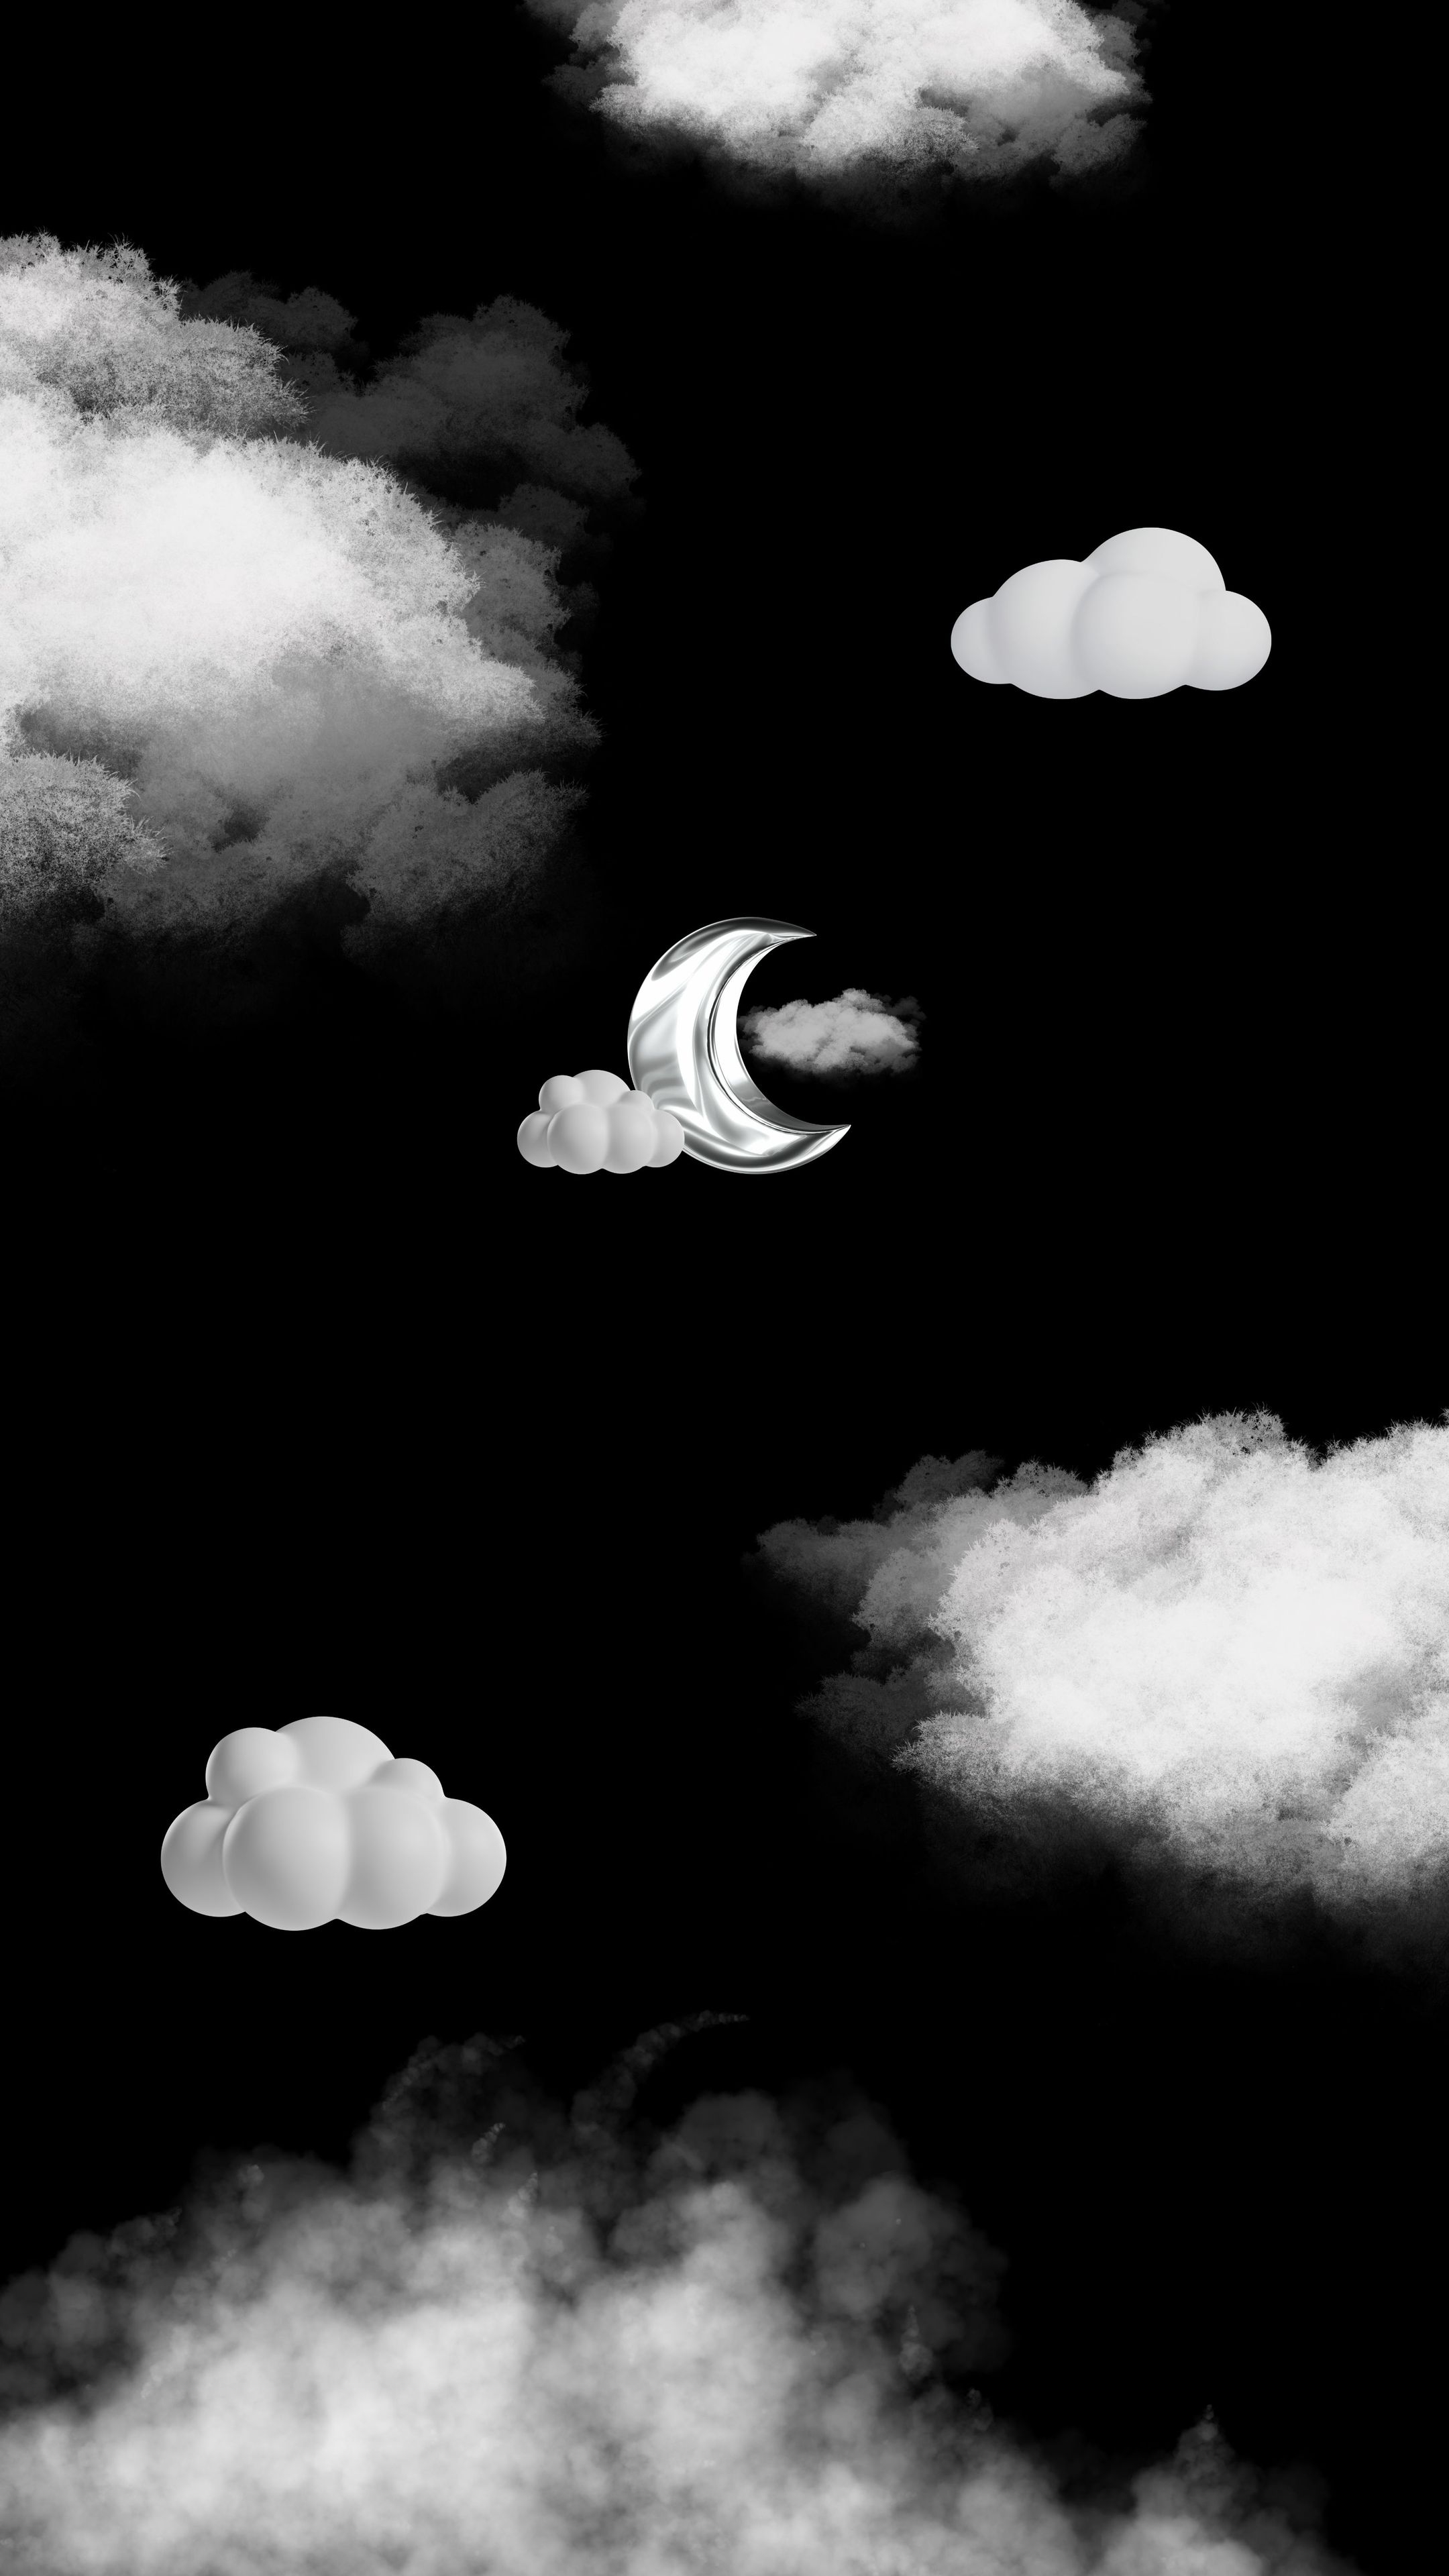 Dreamy Night Sky with Moon and Clouds Tapeta[7bf29b10e3cc452680c9]